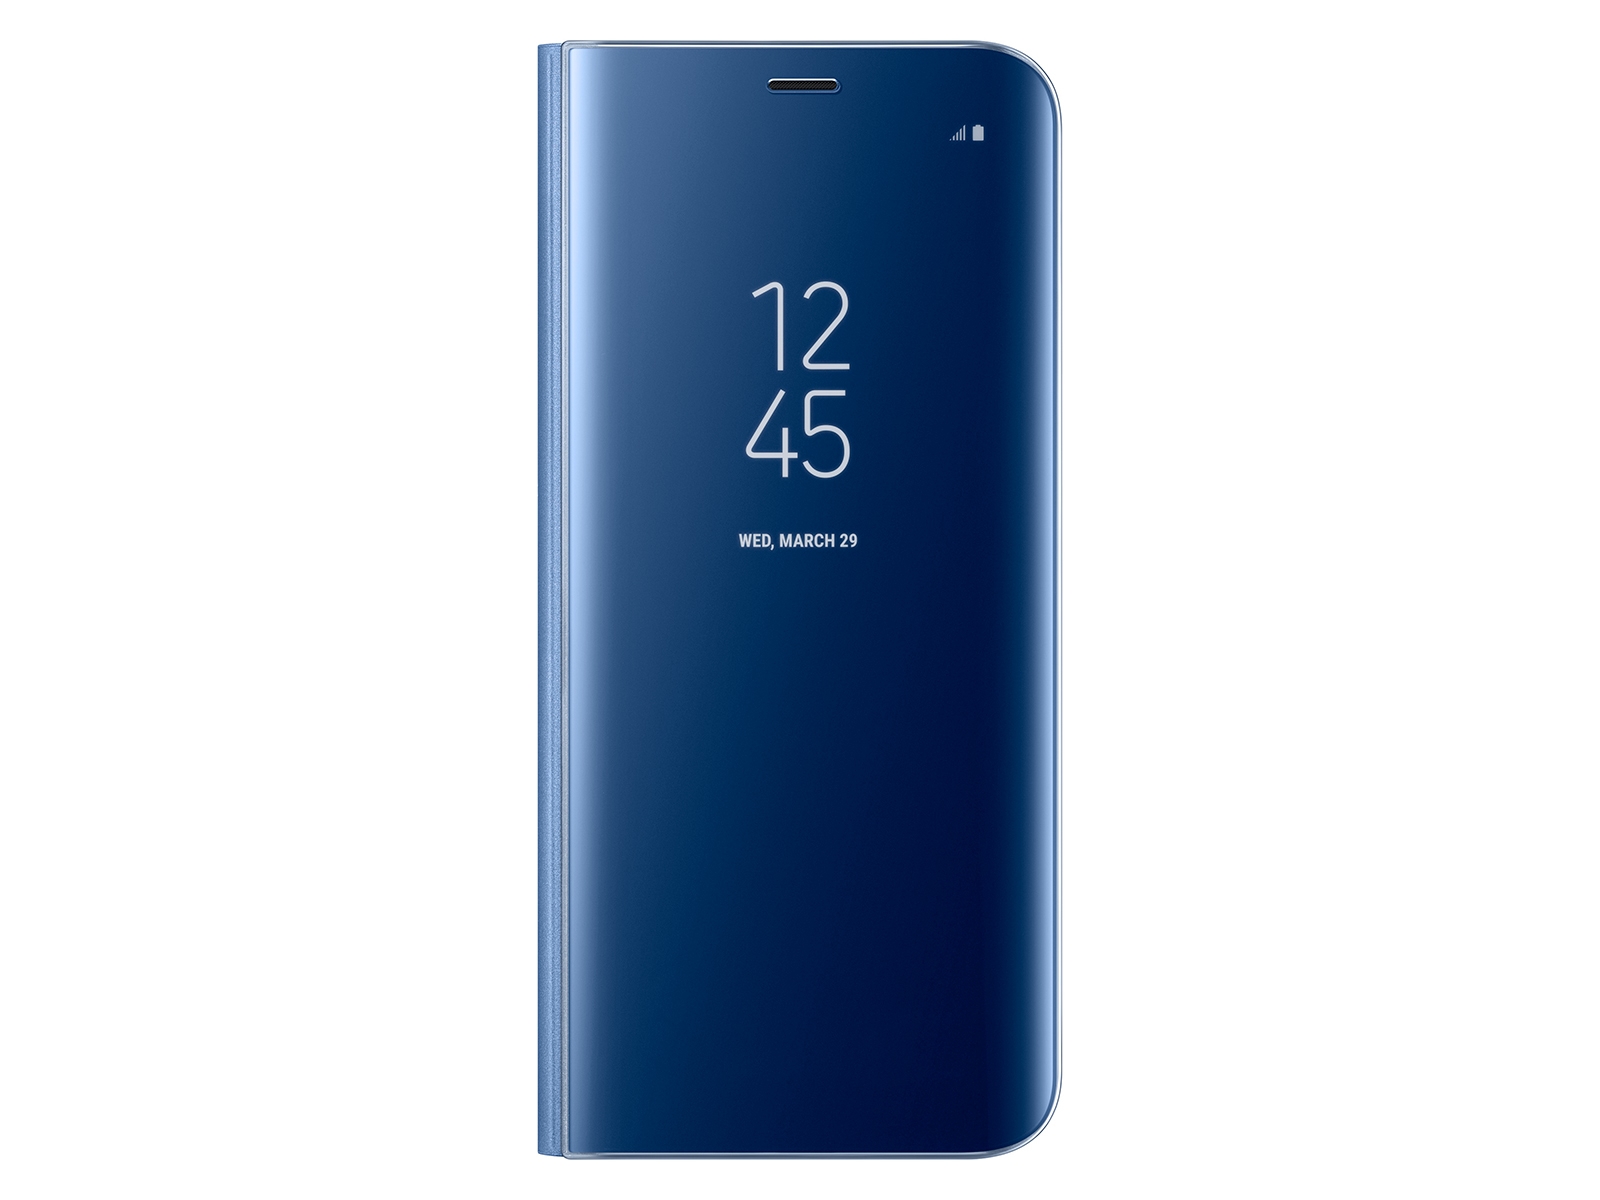 Thumbnail image of Galaxy S8 S-View Flip Cover, Blue